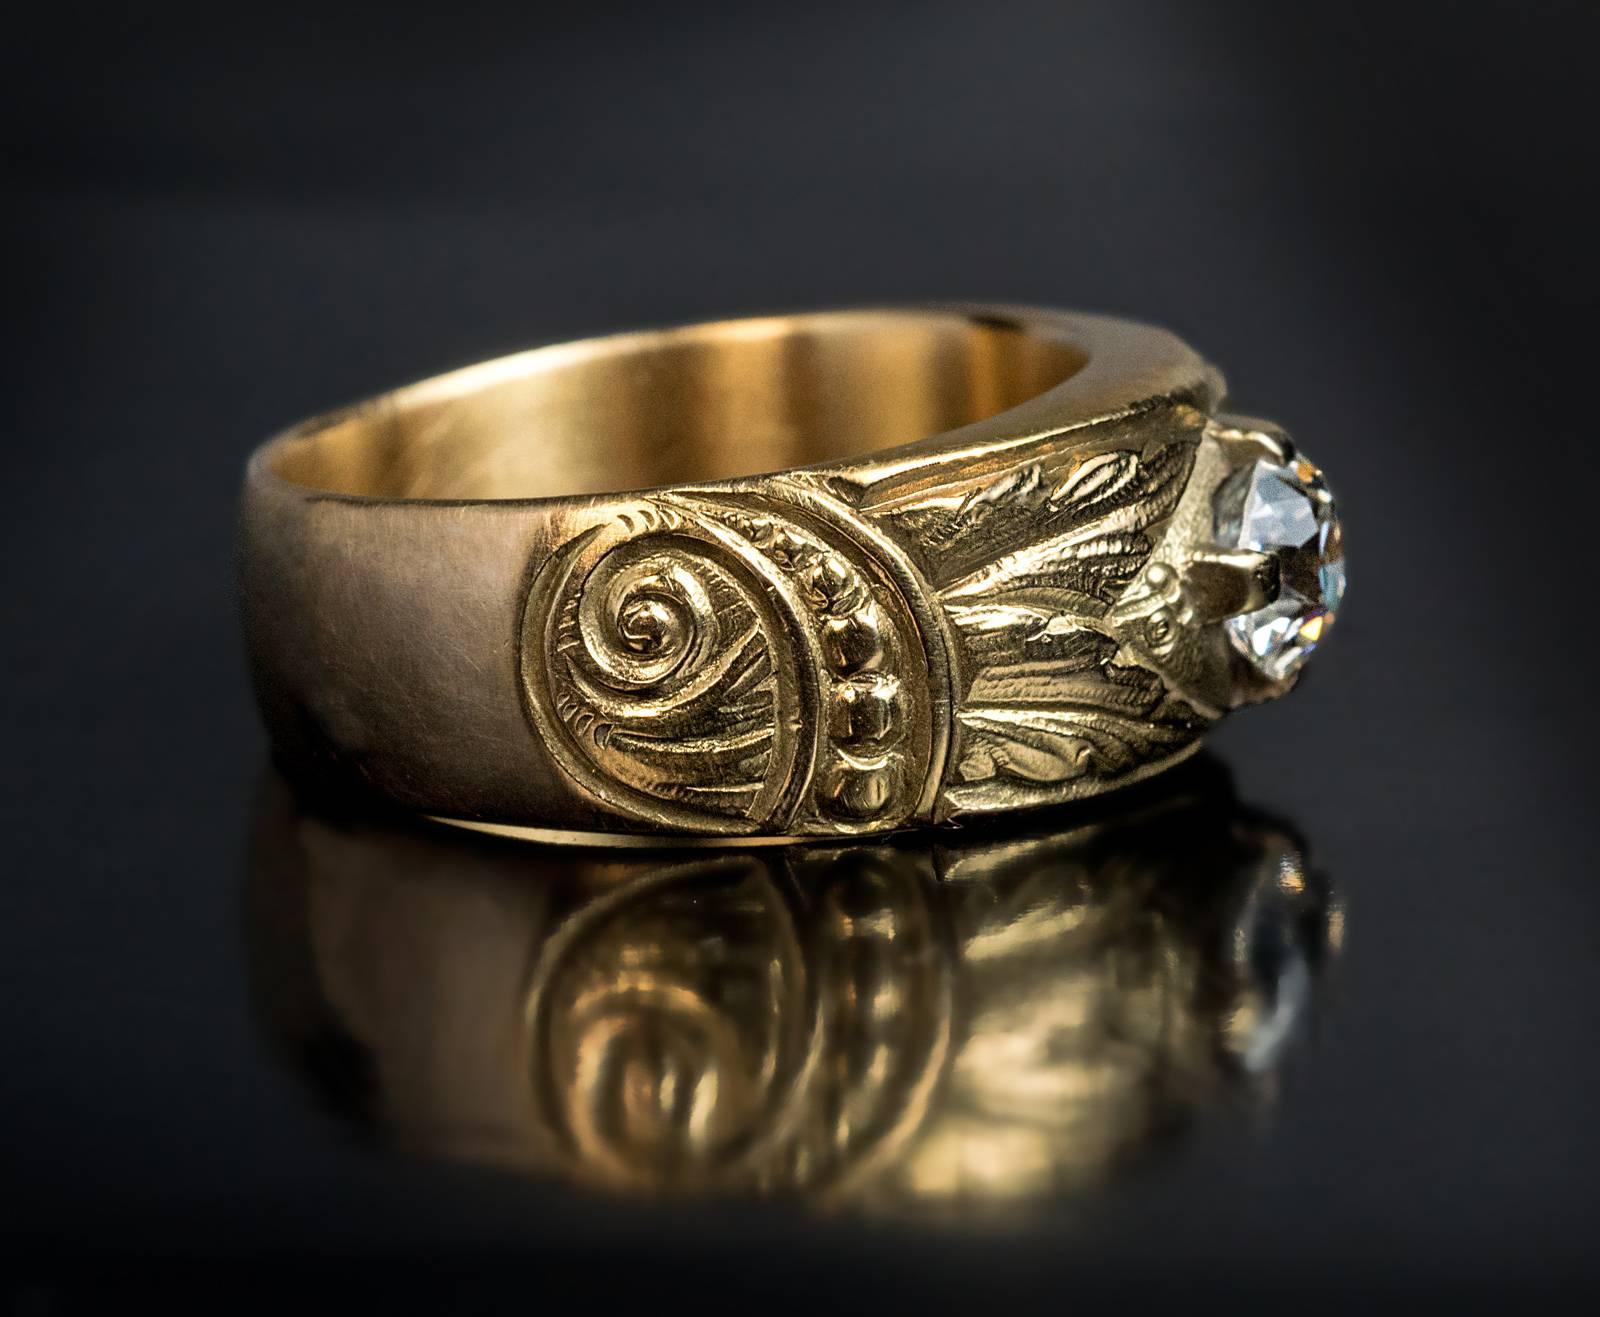 Russian, 1910s

14K gold ring chased and engraved with stylized floral designs in Russian Modern style of the 1910s, set with an antique cushion cut diamond (5.5 x 5.1 x 4 mm, approximately 0.95 ct, F color, VS1 clarity)

width 9 mm (3/8